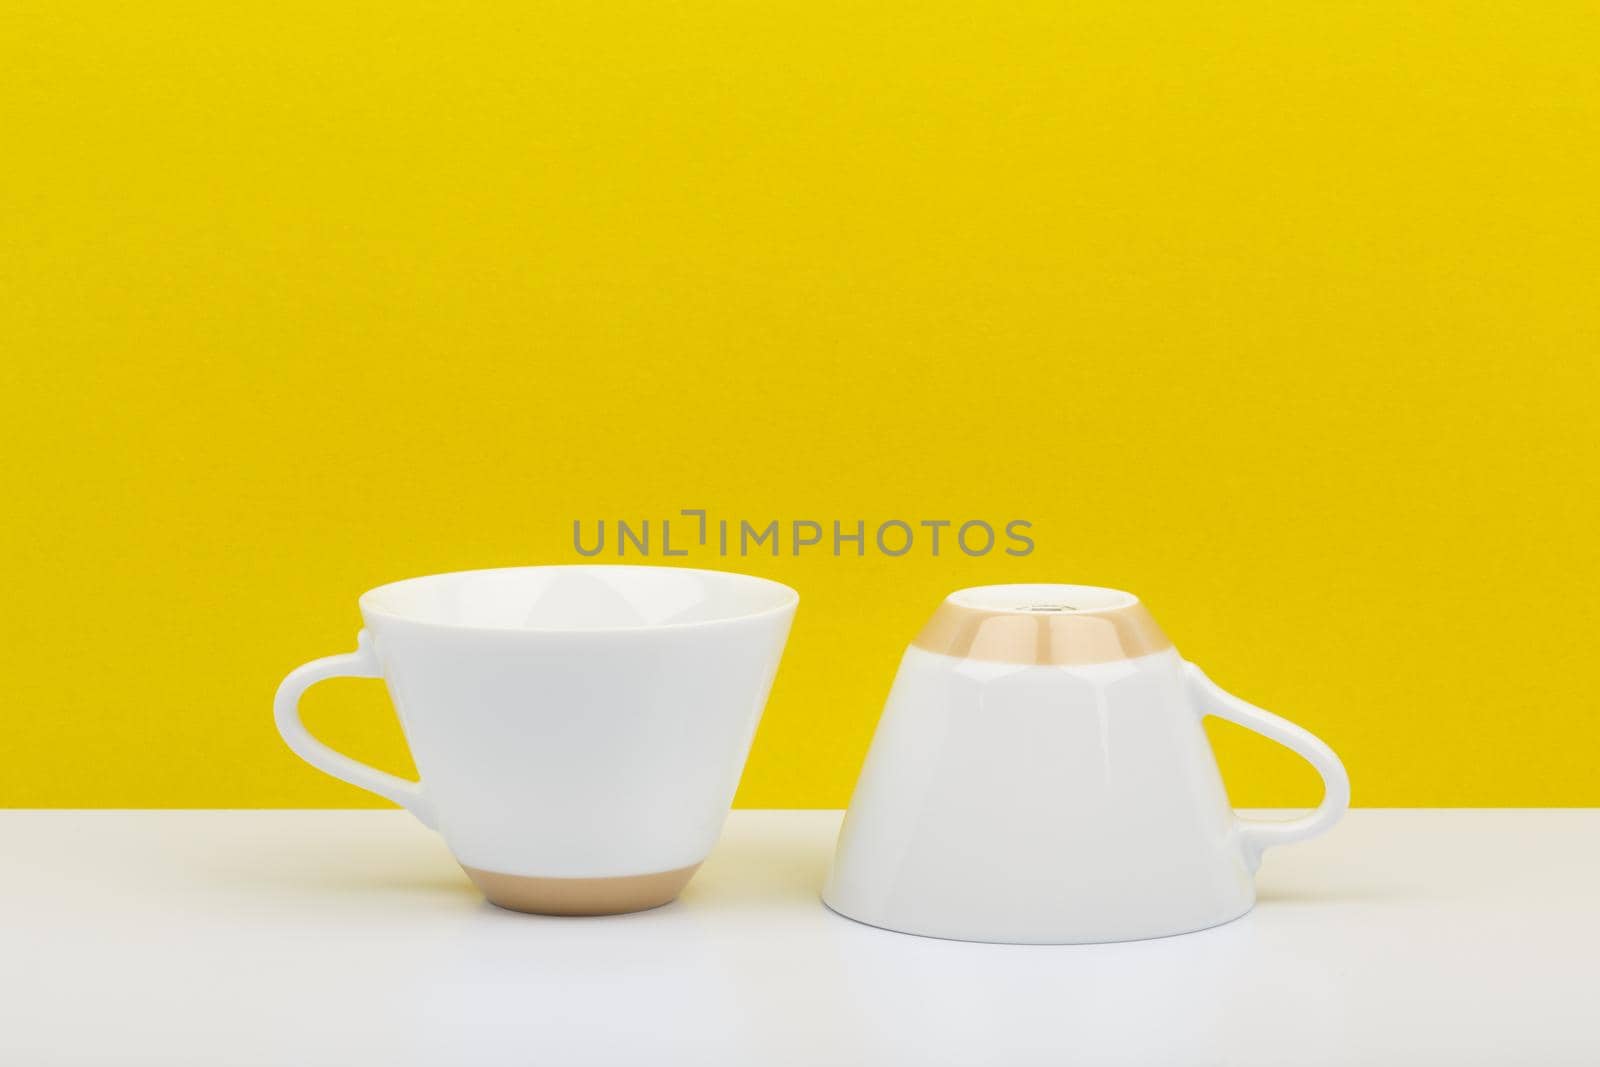 Minimalistic still life with two shiny white ceramic coffee cups on white table against bright yellow background with space for text. High quality photo